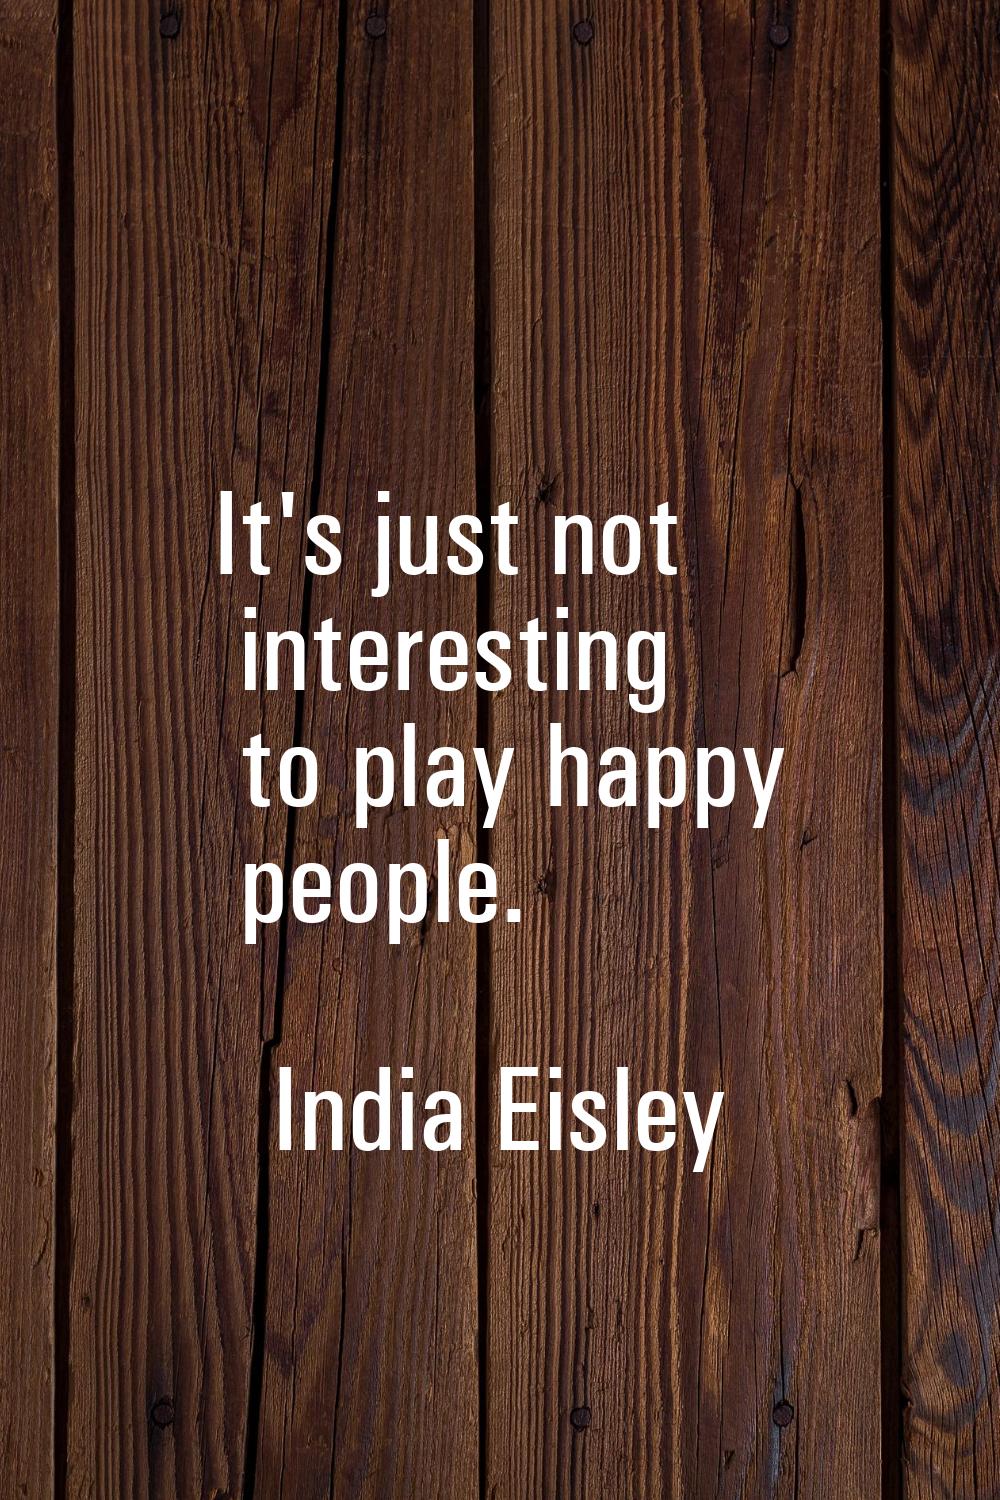 It's just not interesting to play happy people.